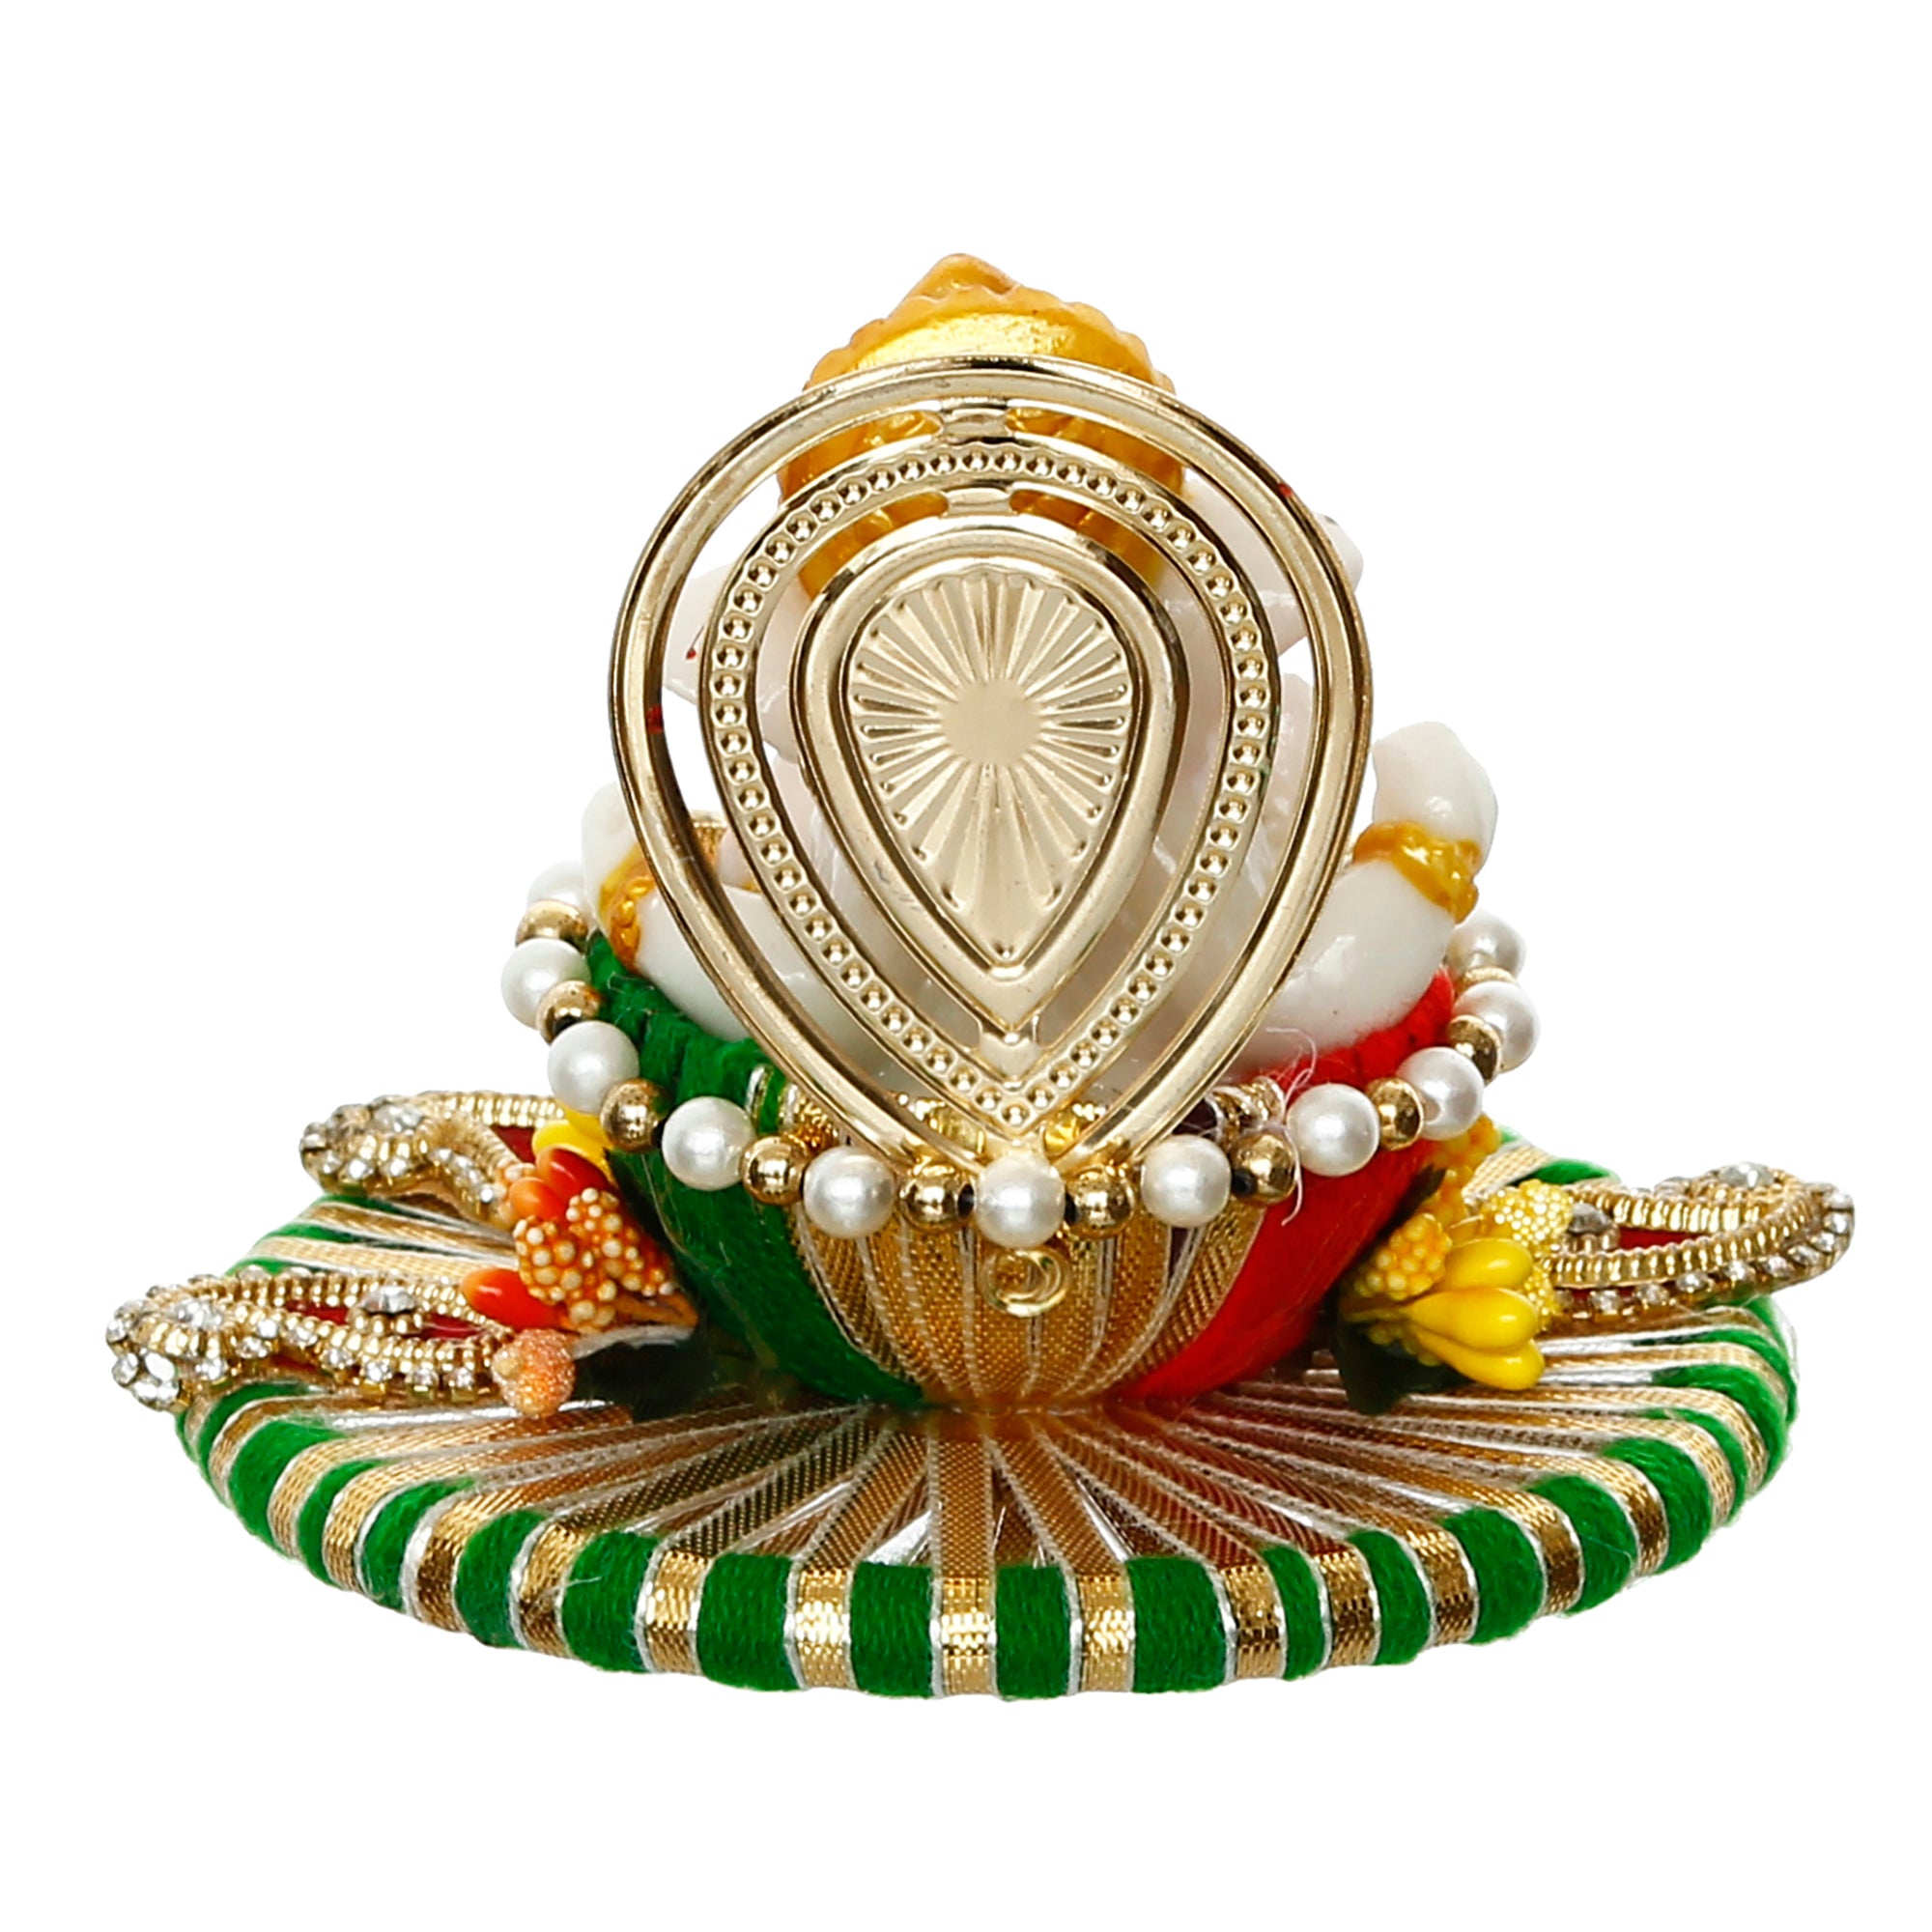 Lord Ganesha Idol on Decorative Handcrafted Singhasan for Home/Temple/Office/Car Dashboard 6